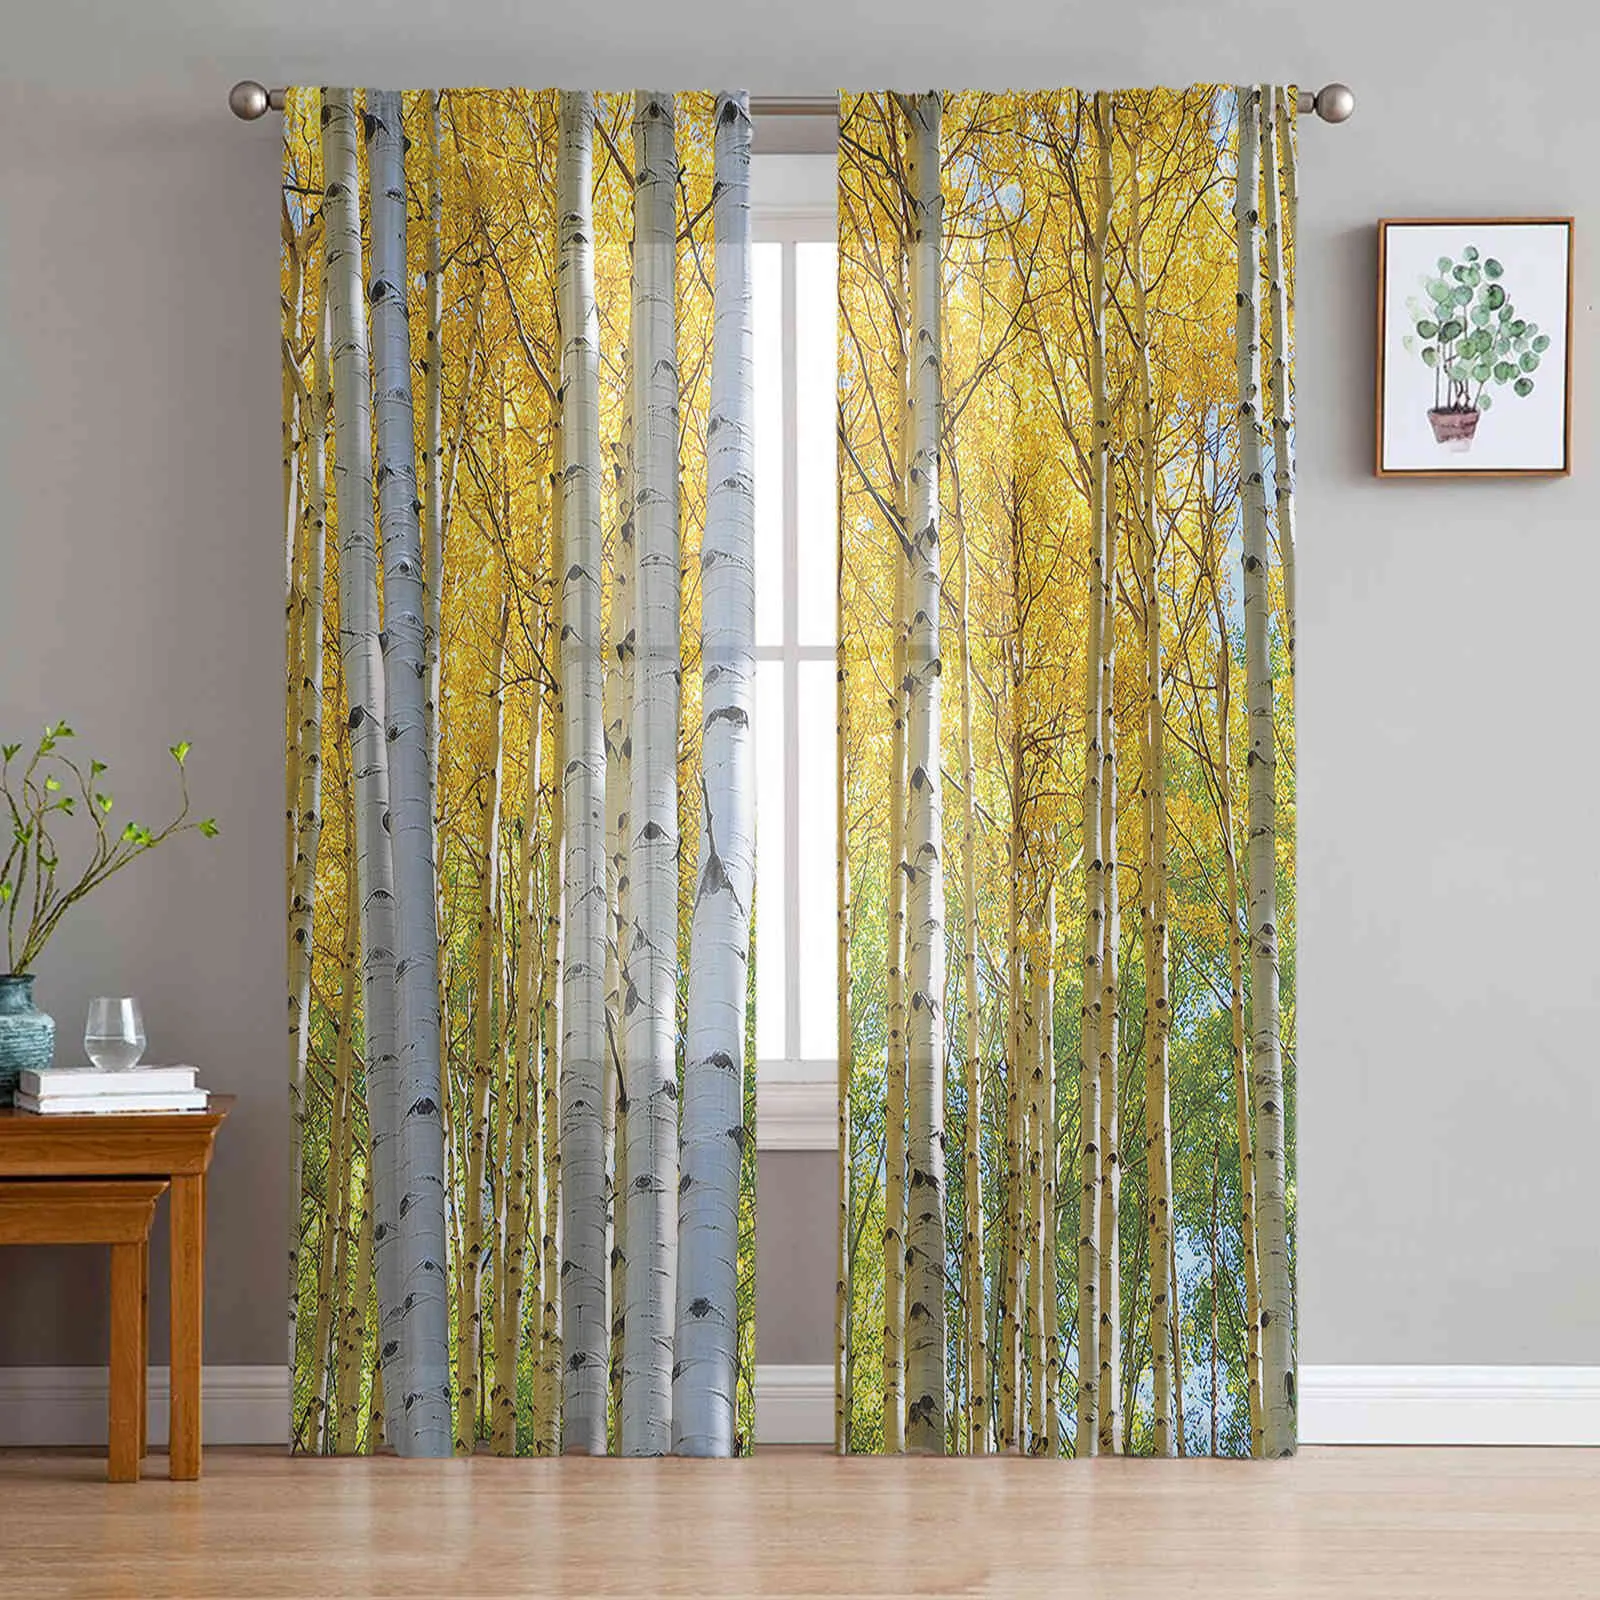 Tulle for Living Room Yellow Birch Forest Bedroom Study Window Sheer Kitchen Balcony Interior Voile Curtain